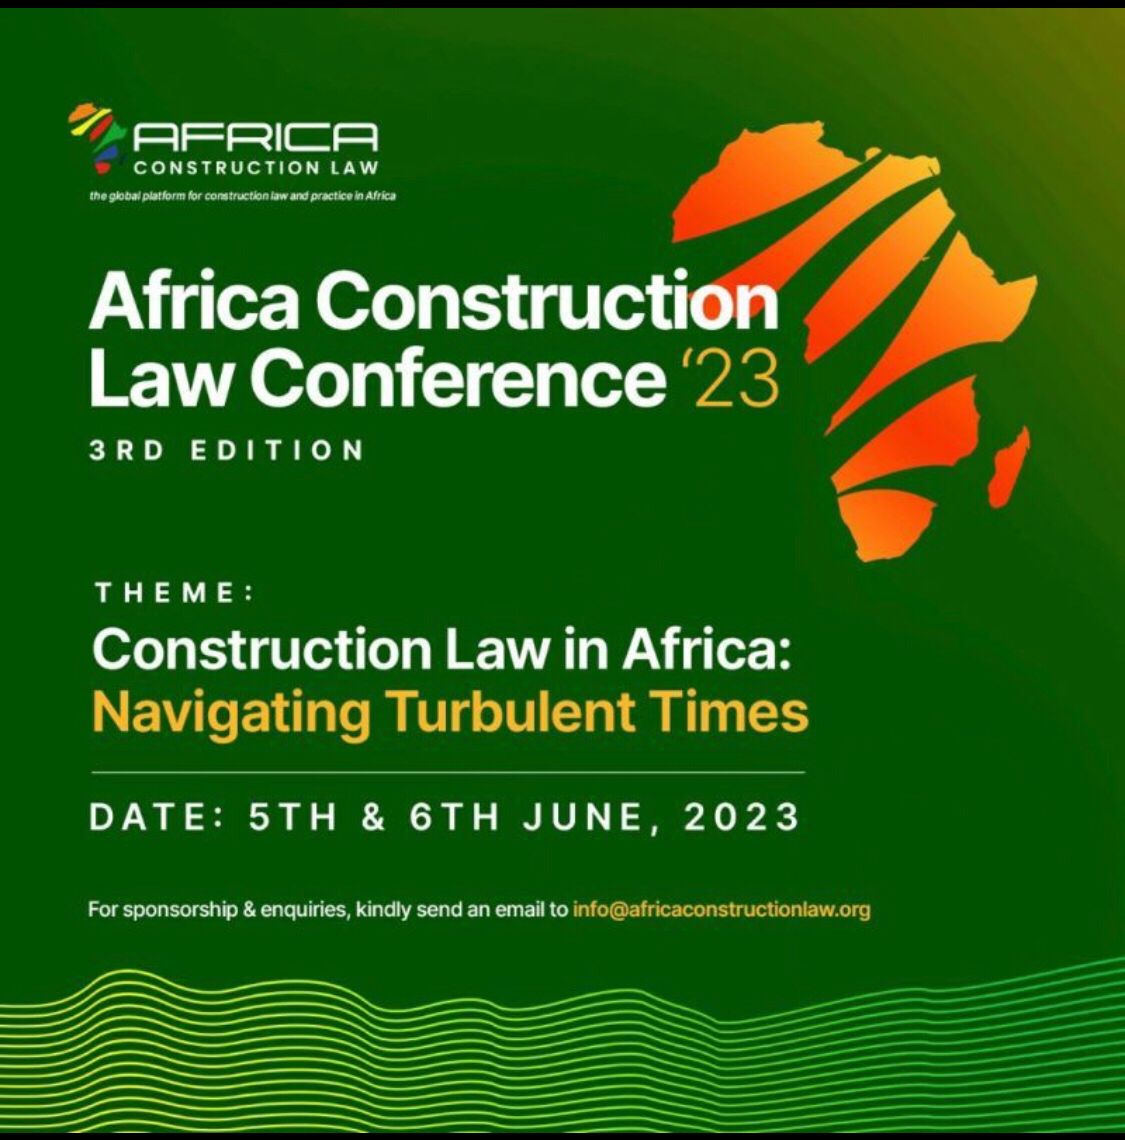 AFRICA CONSTRUCTION LAW CONFERENCE 2023 (FULL DETAILS)